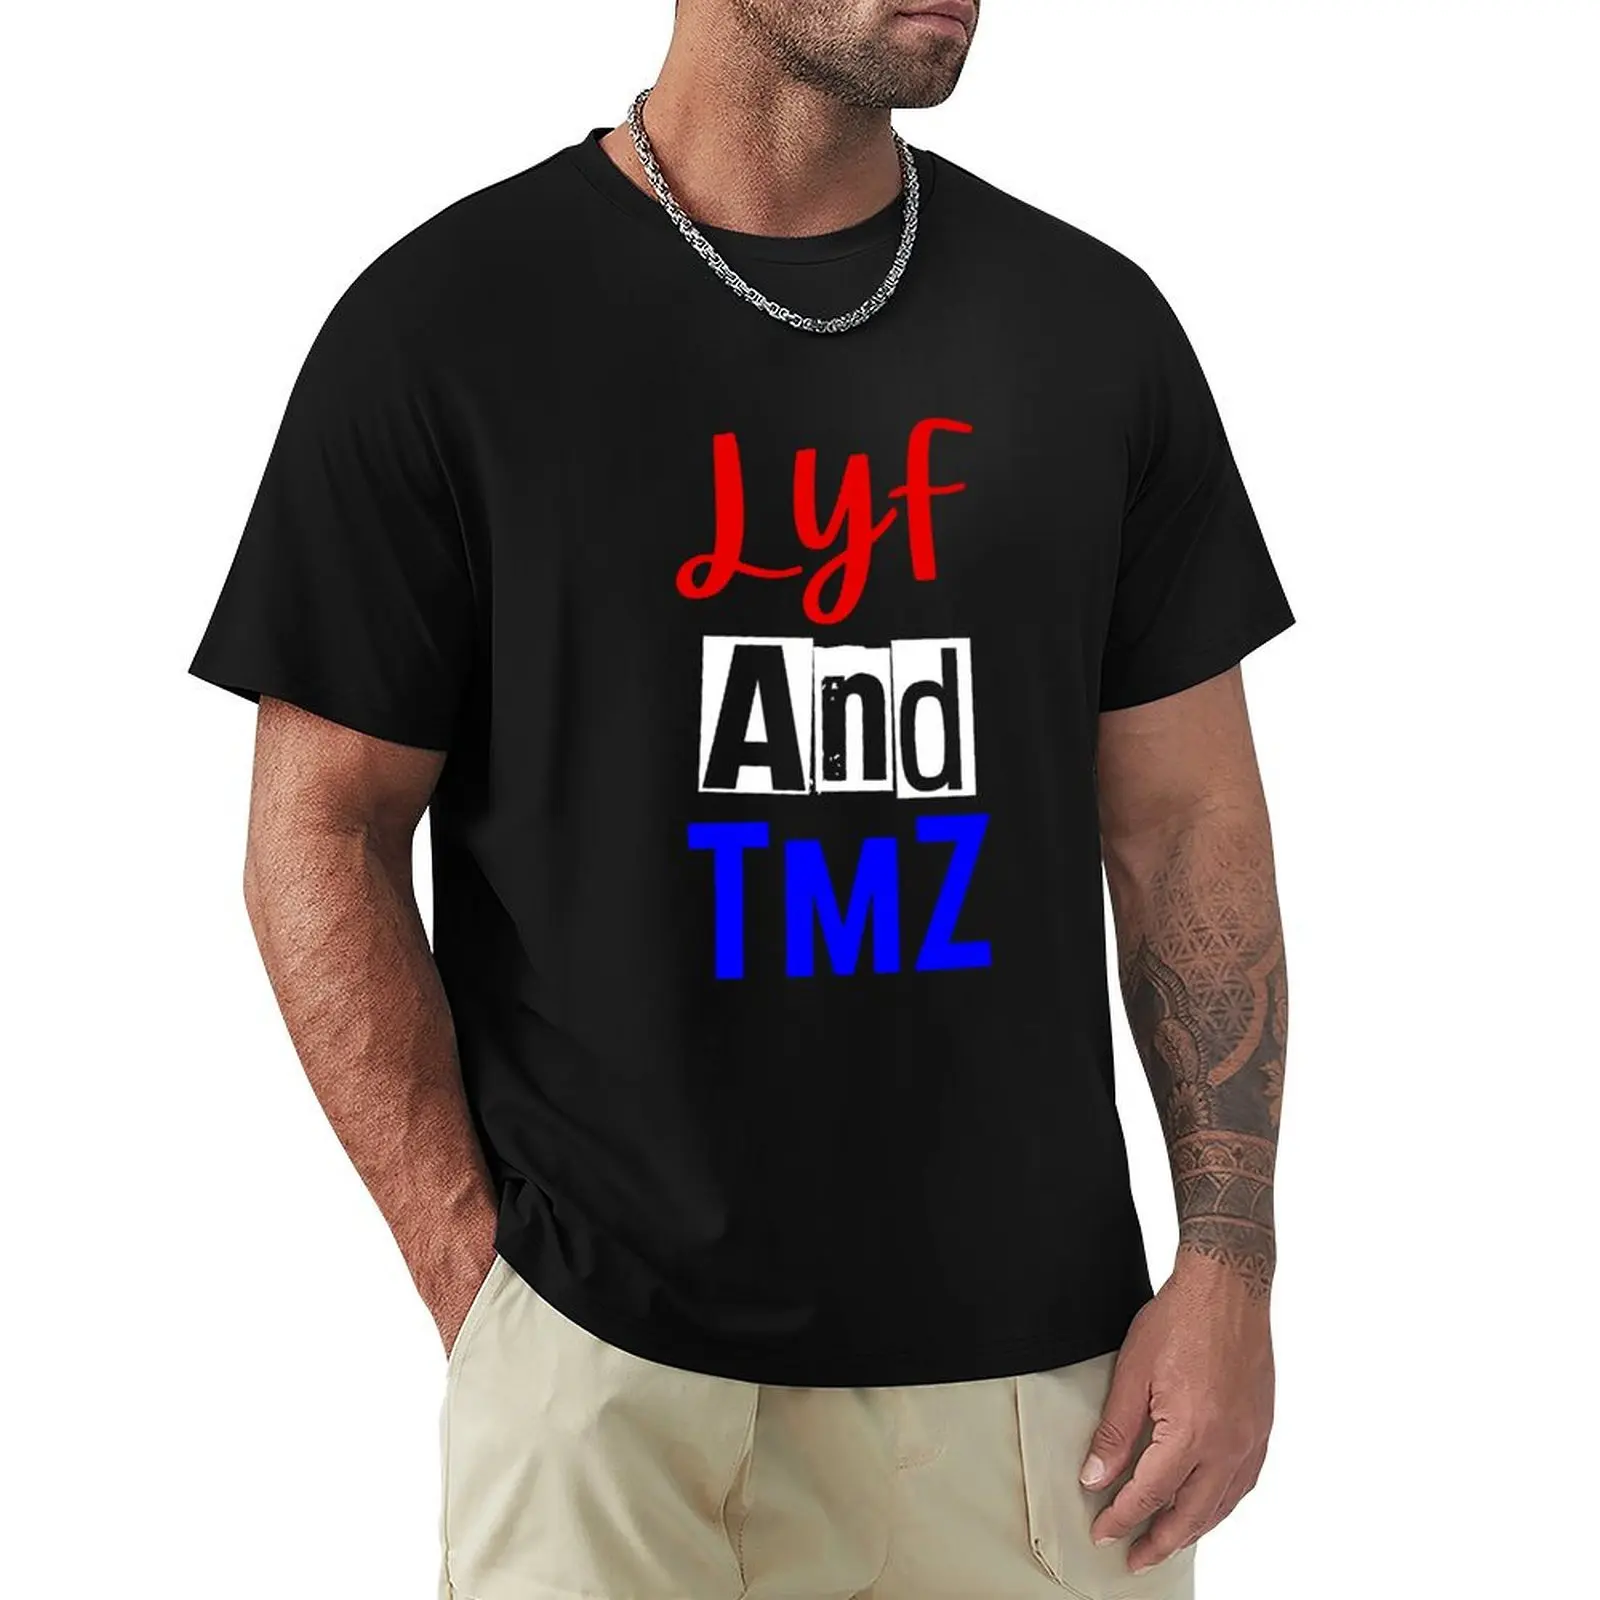 Lyf and TmZ Captioned T-shirt cute tops cute clothes oversized funny t shirts for men